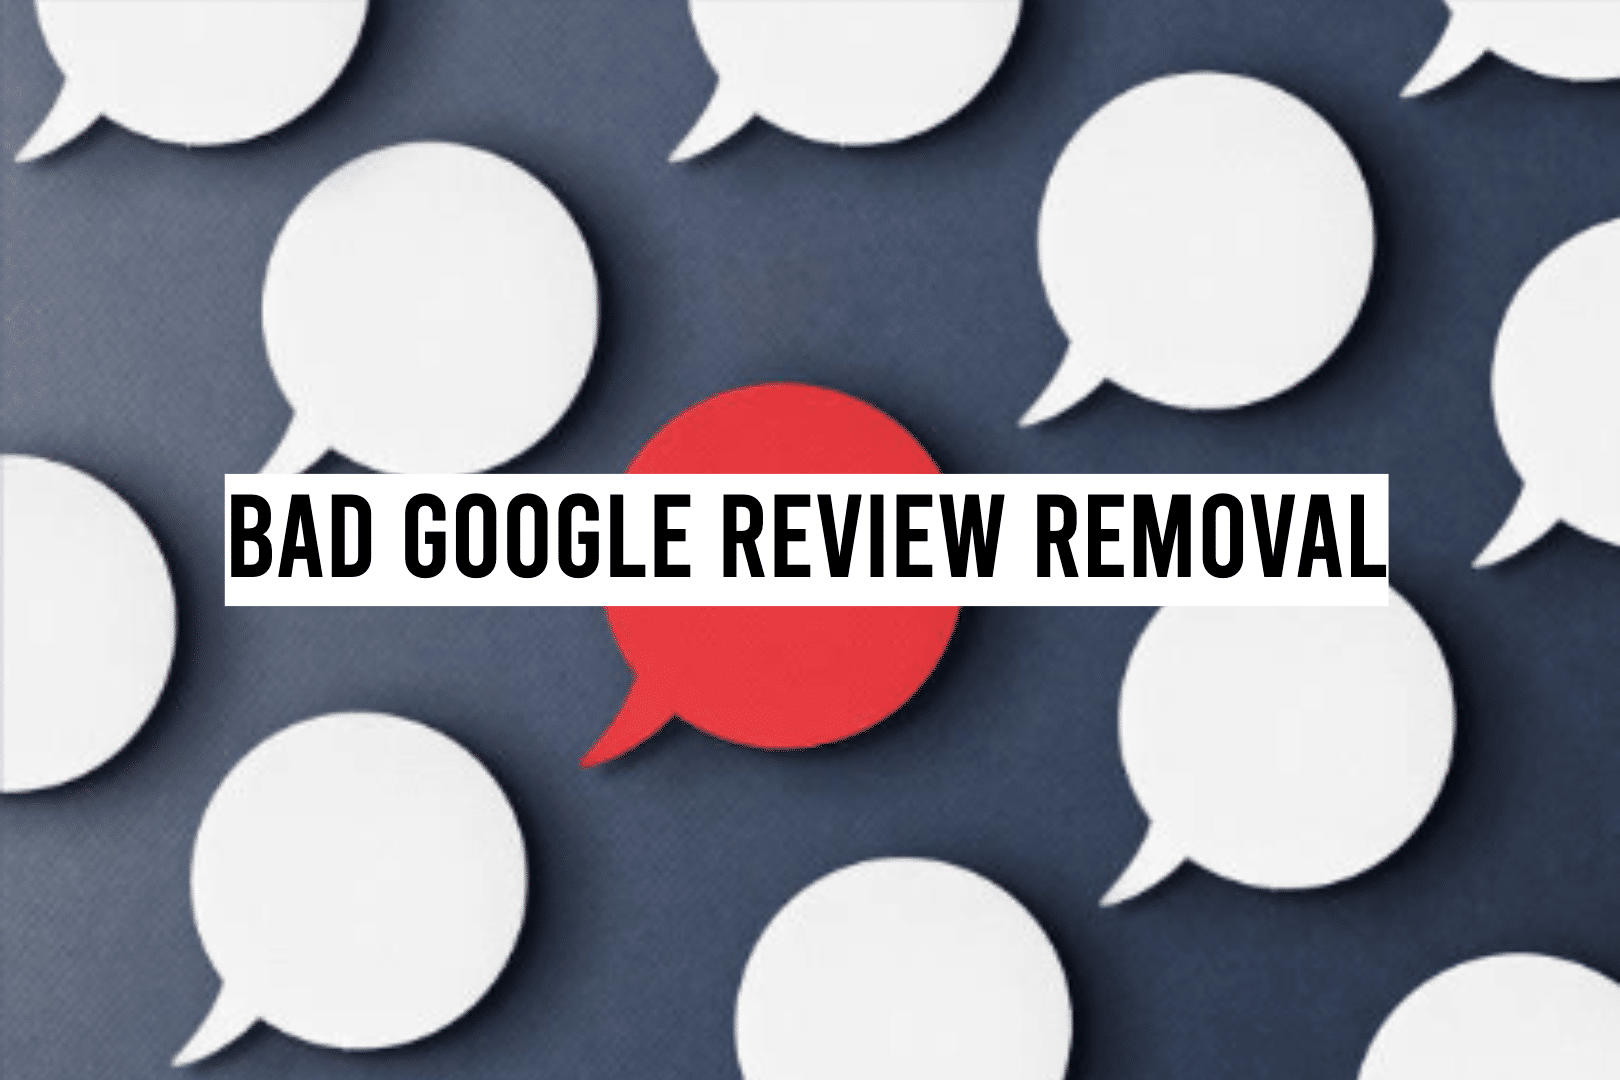 Bad Google Review Removal photo